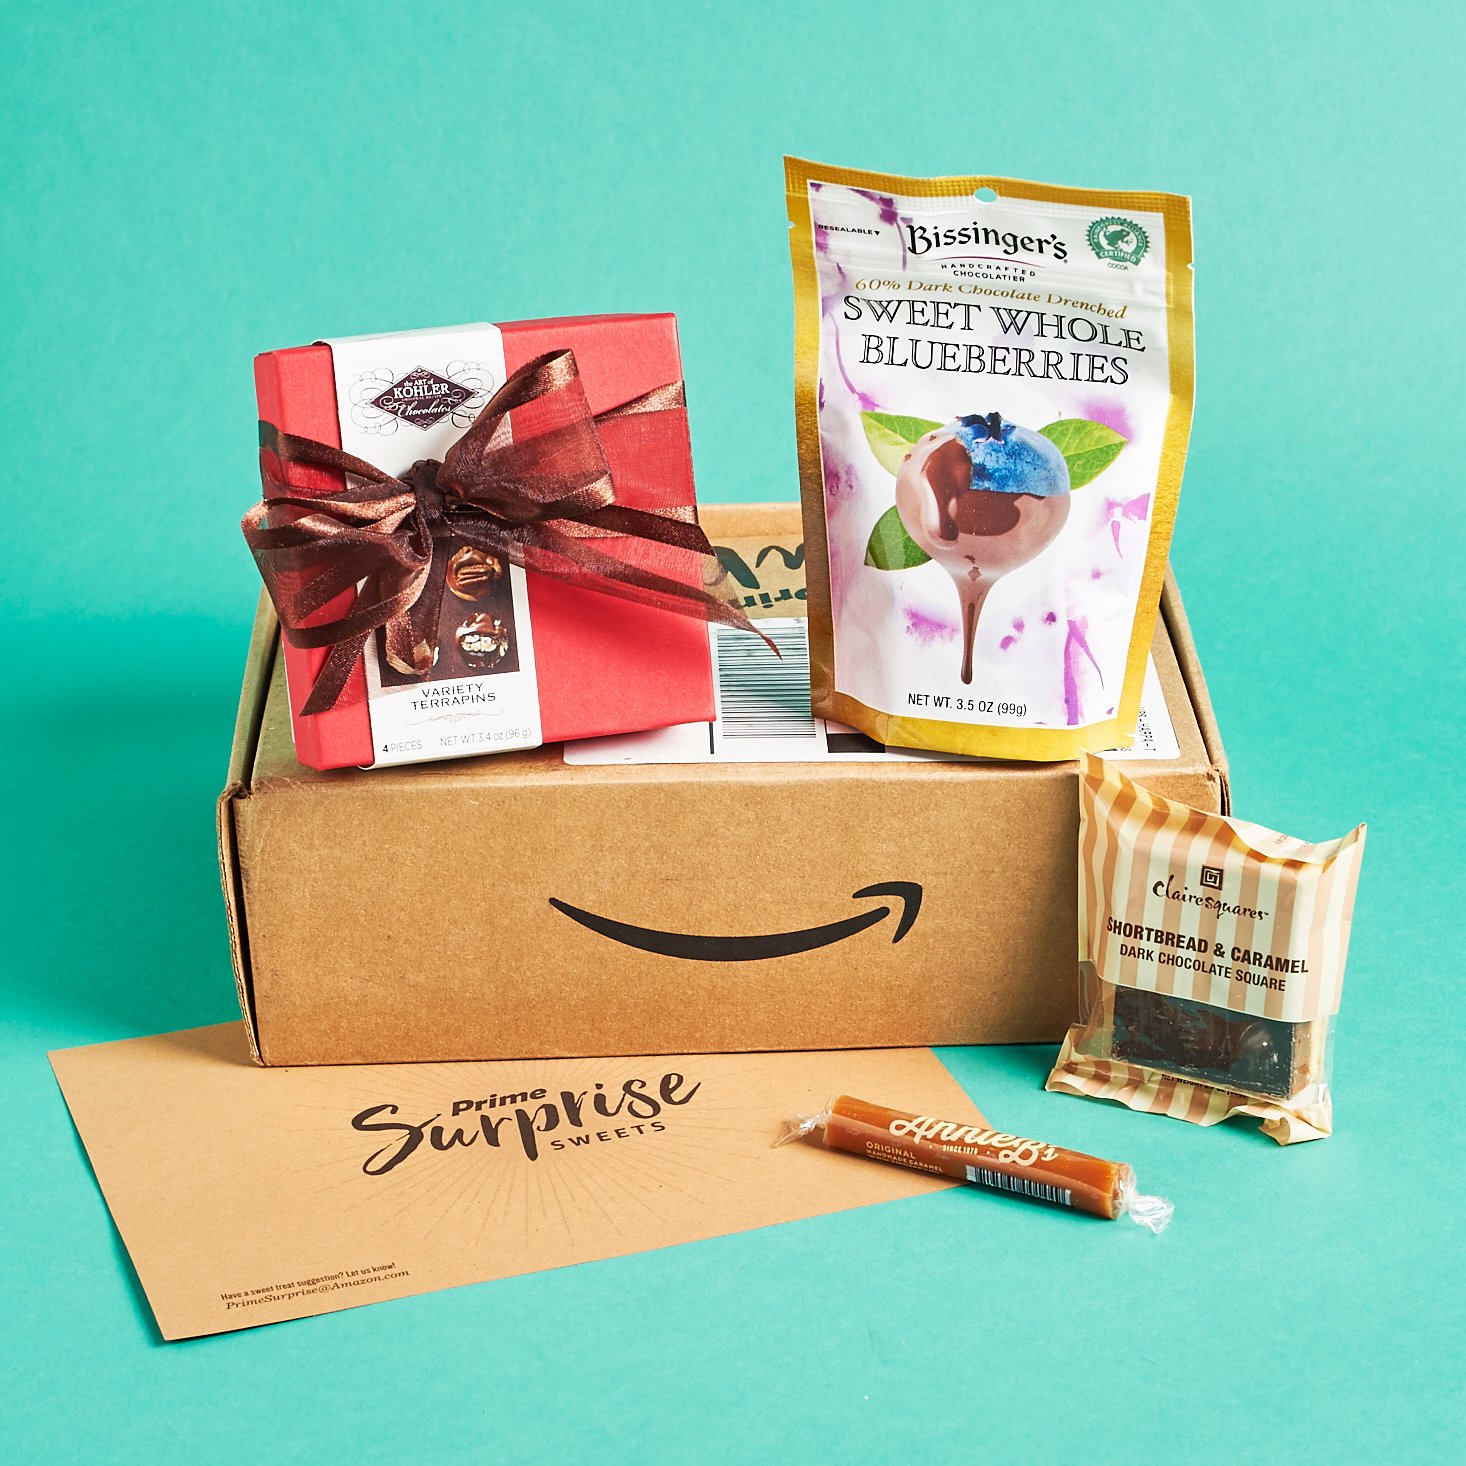 Amazon Prime Surprise Sweets Box #2 Review – January 2017